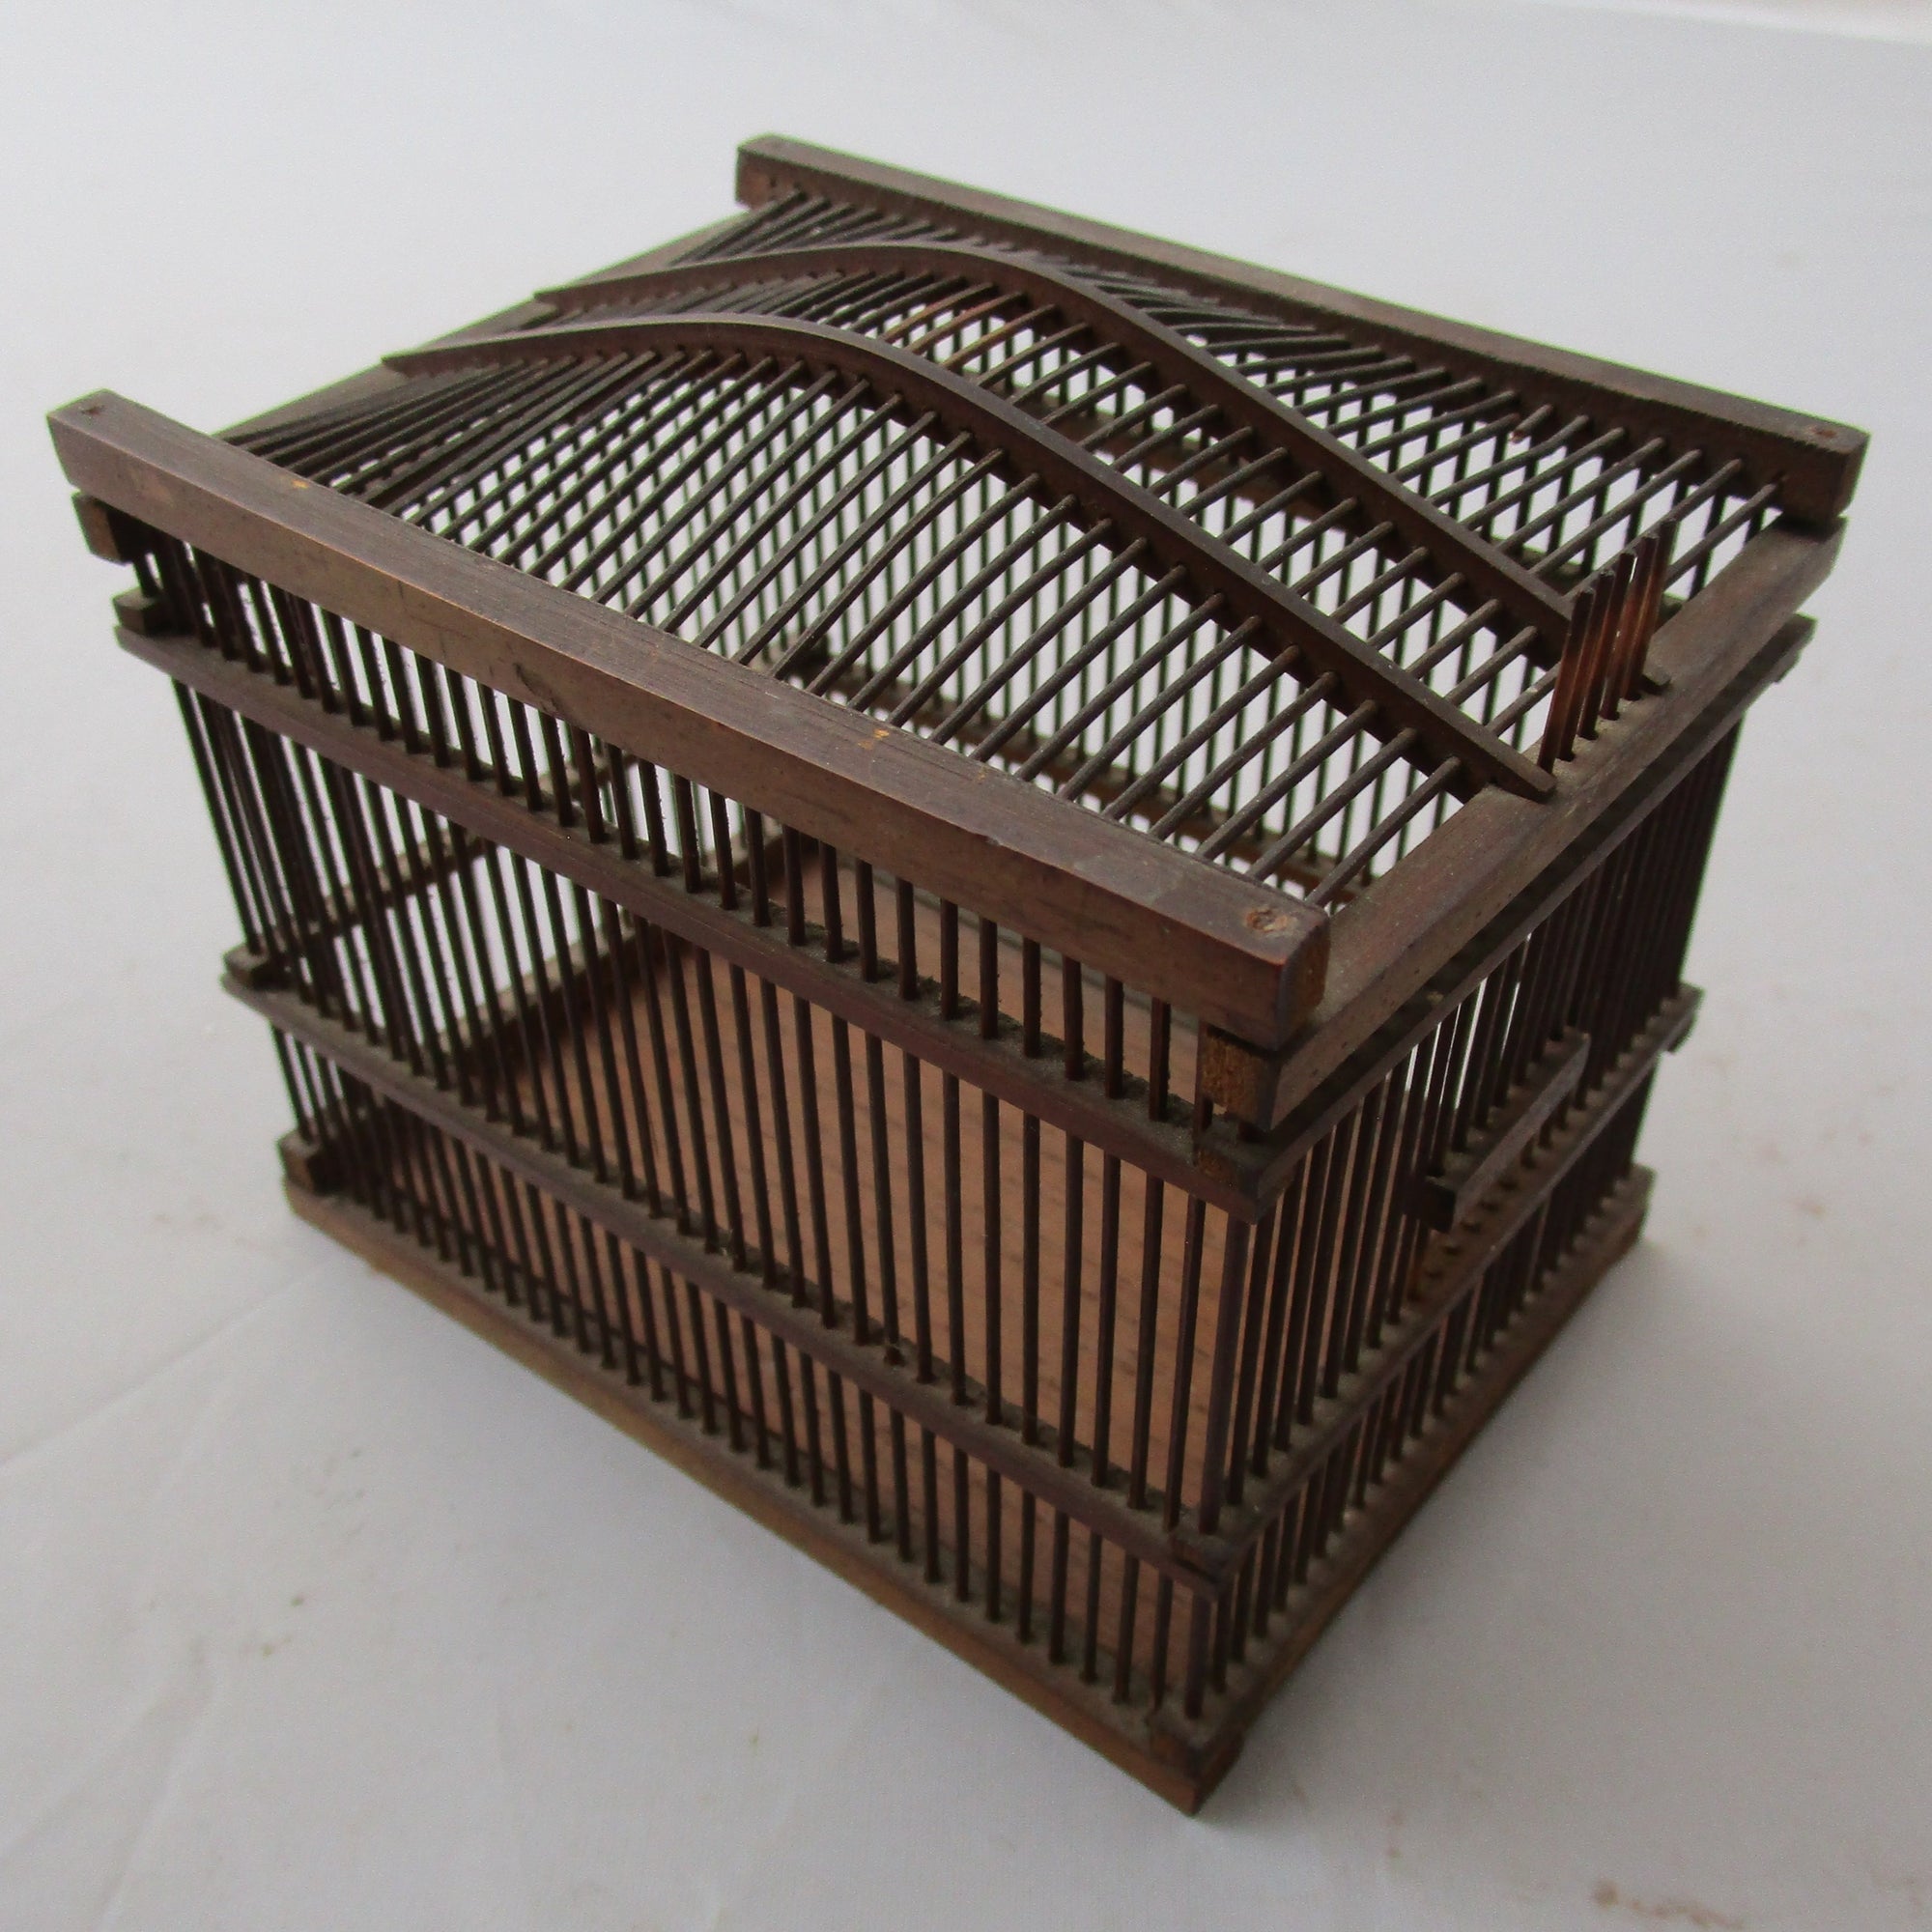 Chinese Bamboo Cricket Cage Antique Victorian c1900